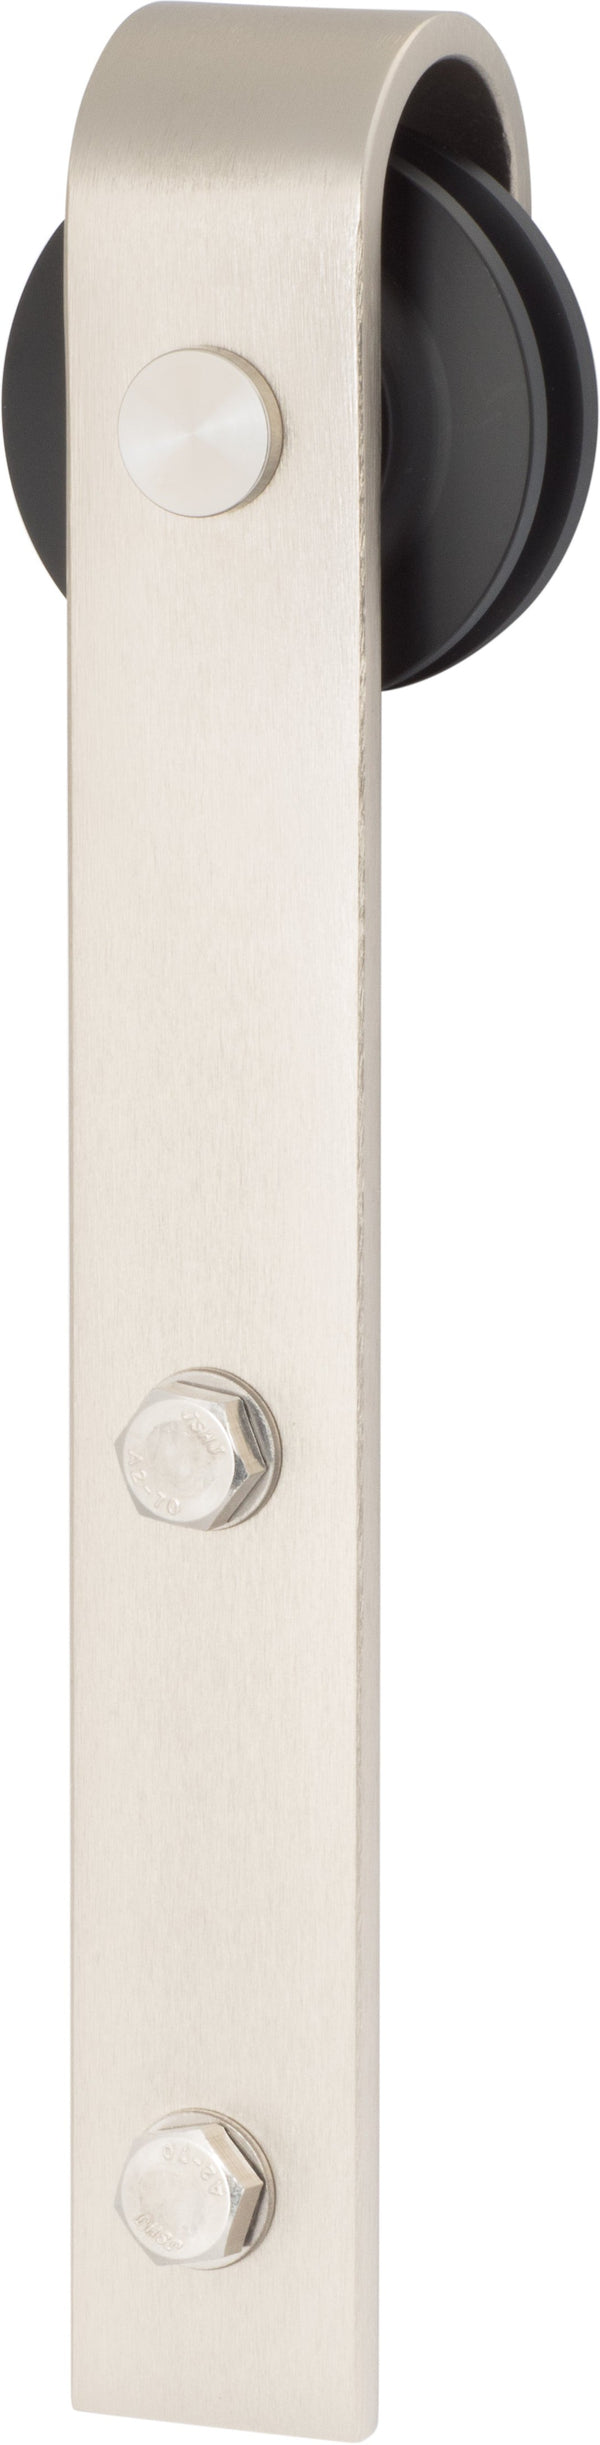 Sure-Loc Barn Track Single Roller Only in Satin Nickel finish